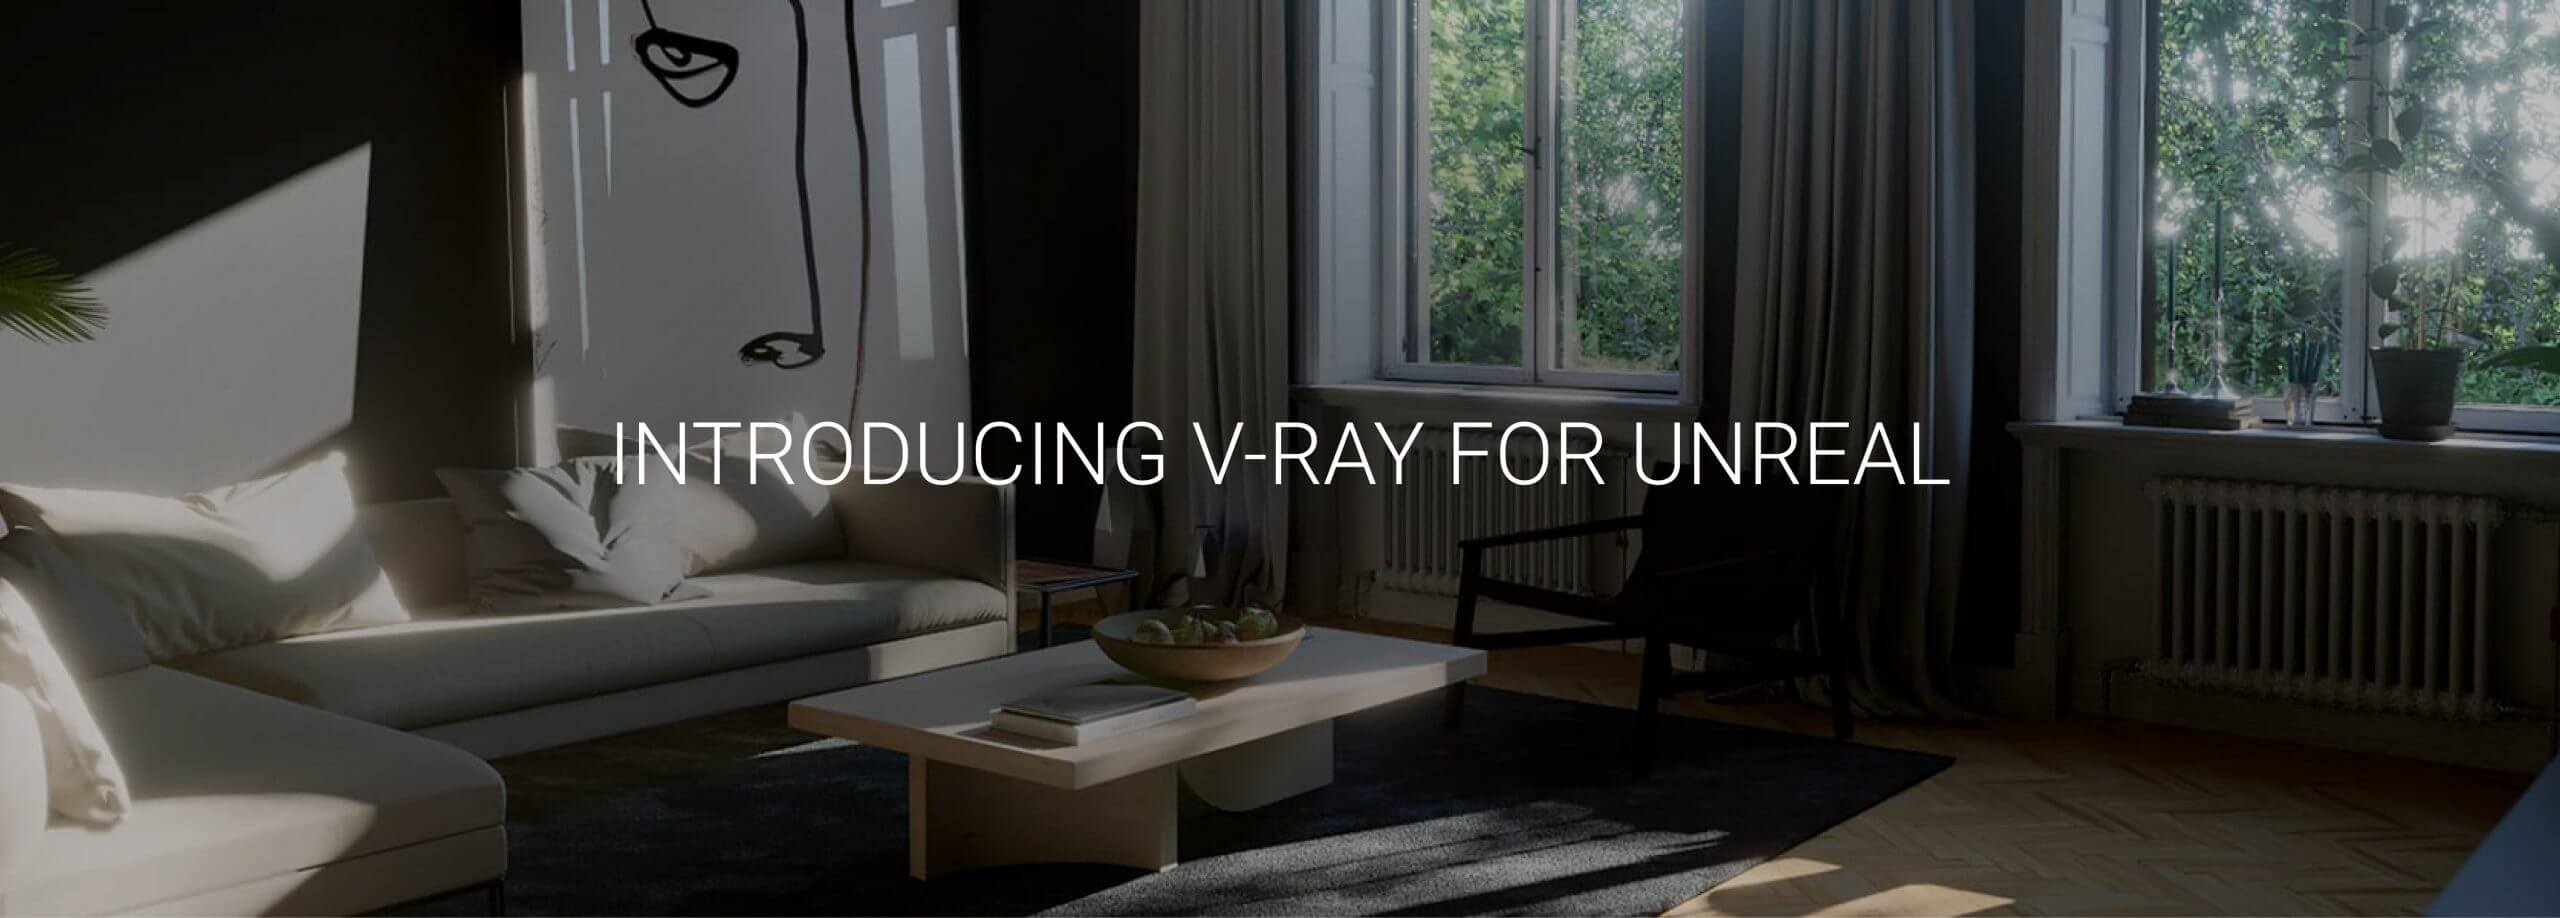 Vray for Unreal Campaign